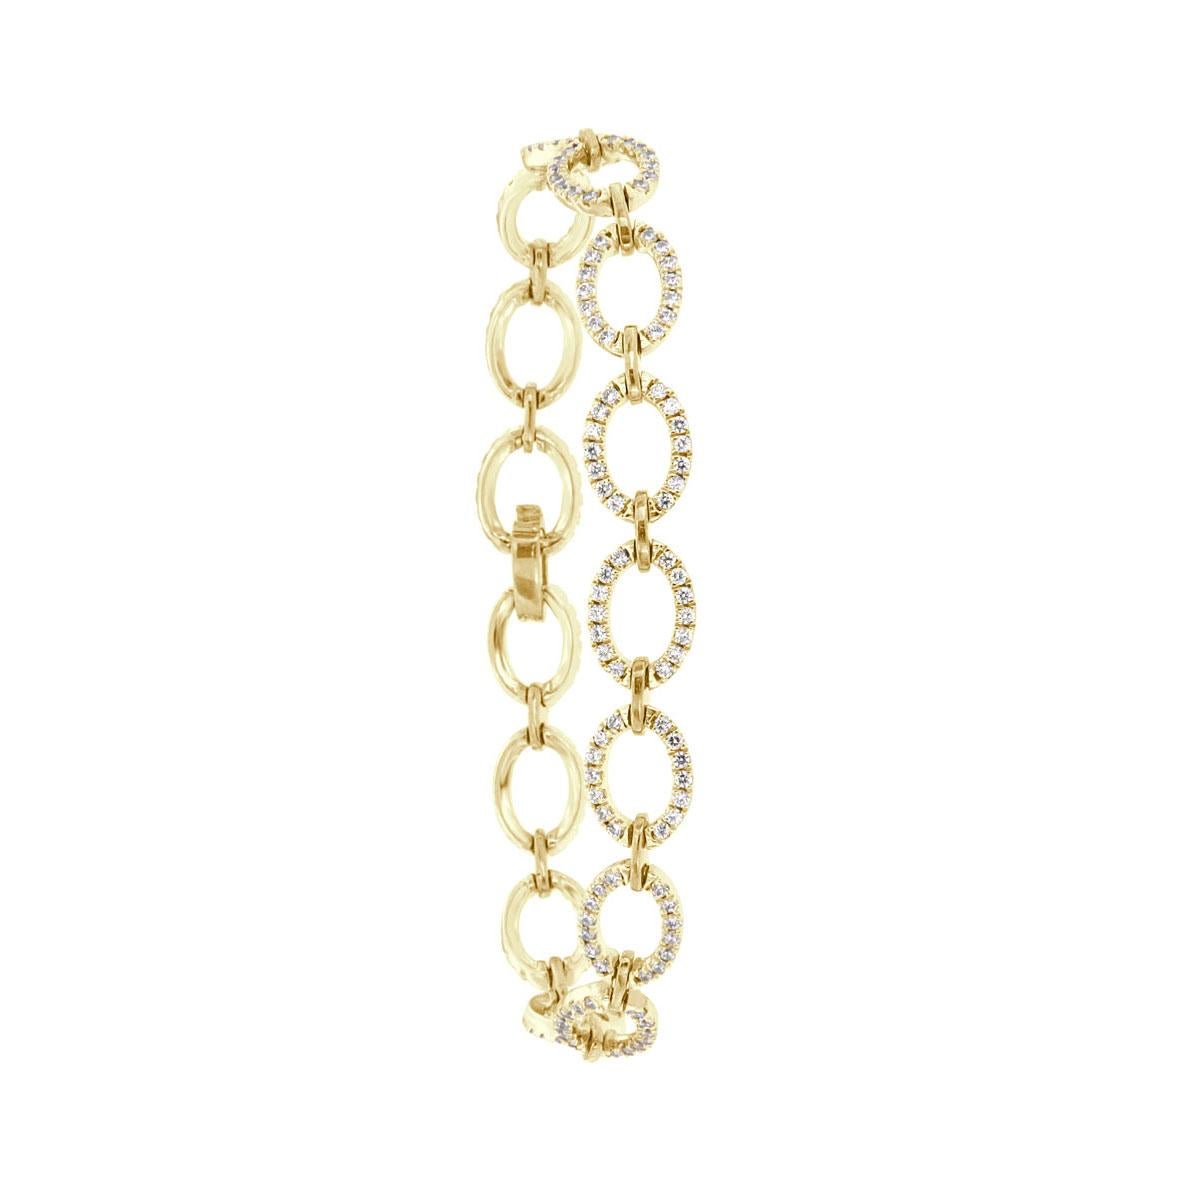 Round Cut 18 Karat Yellow and White Gold Oval Link Diamond Bracelet '1 3/4 Carat' For Sale